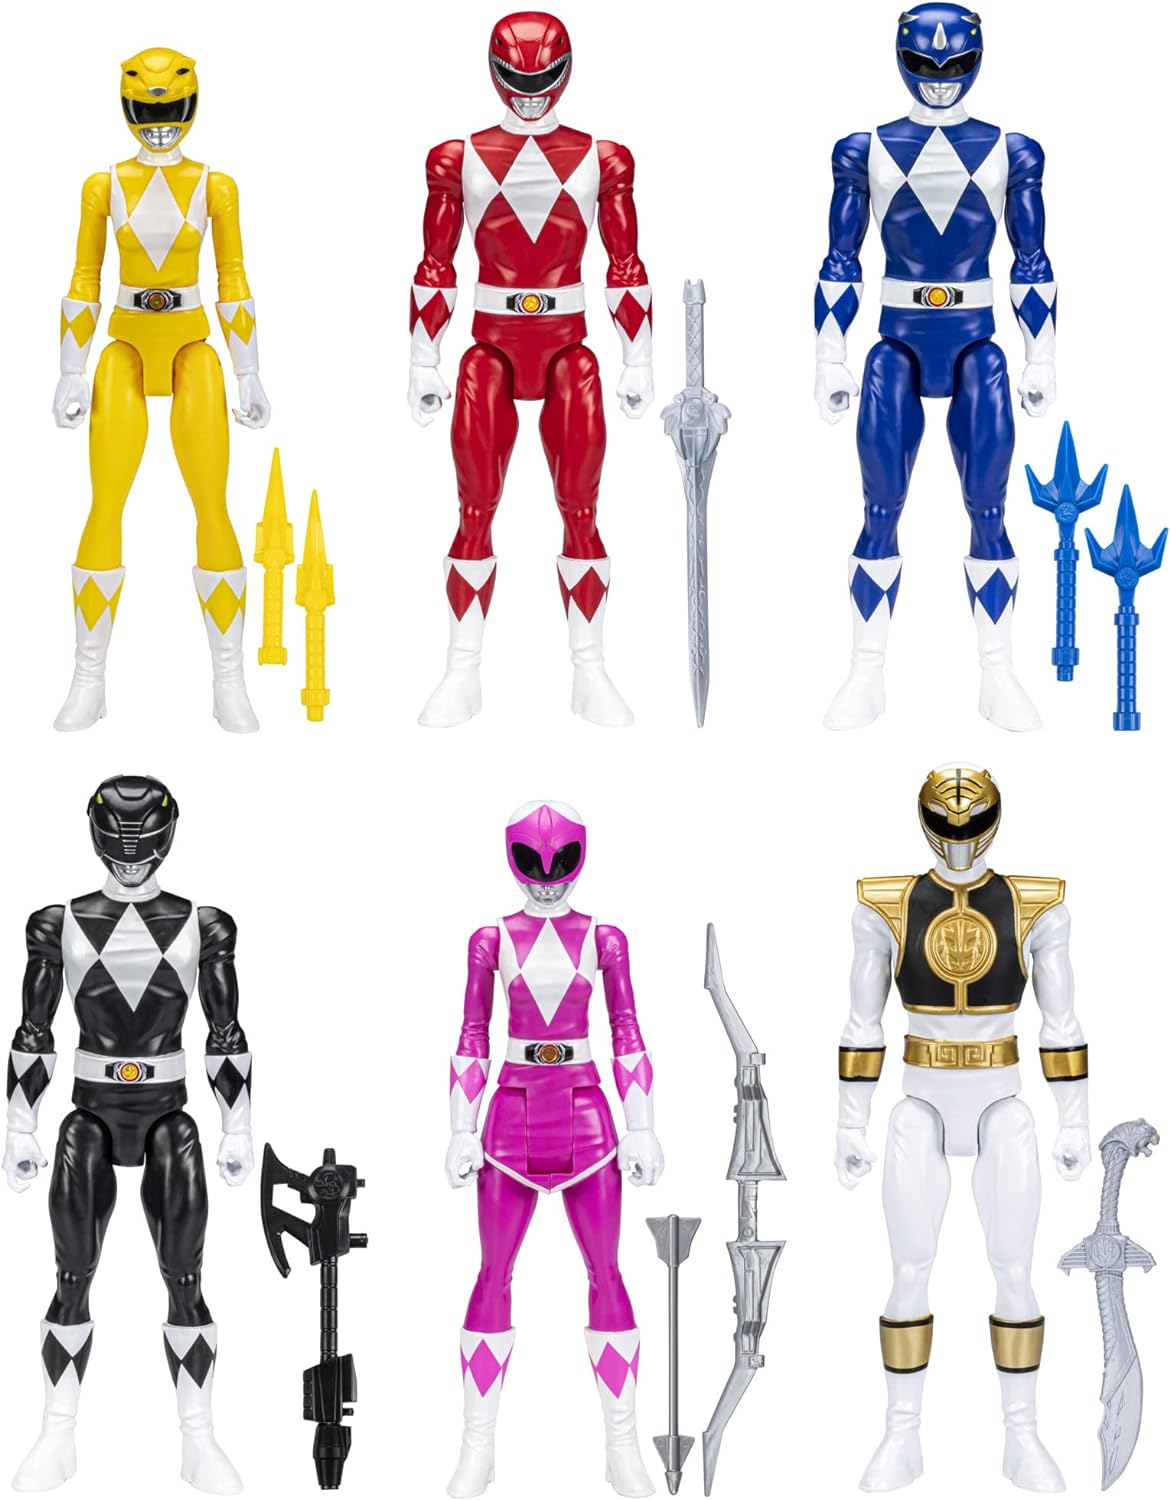 12" 1/6th scale  POWER RANGERS articulated toy action figures YOUR PICK! 